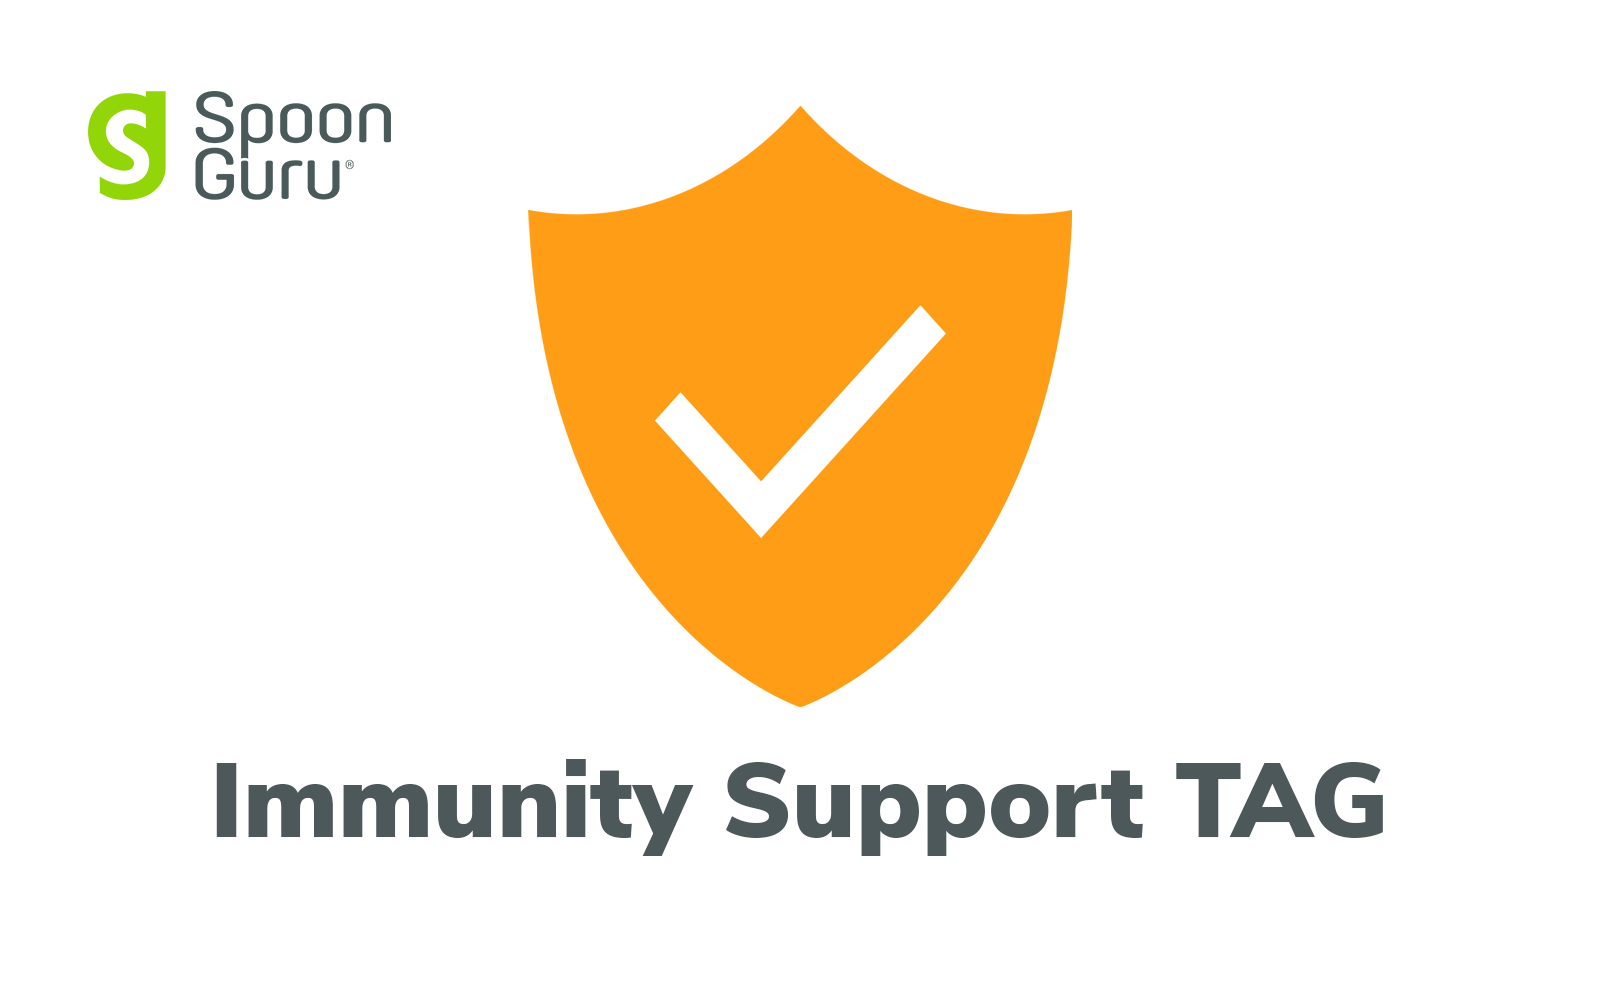 Spoon Guru launches Immunity Support TAG in the wake of Covid-19